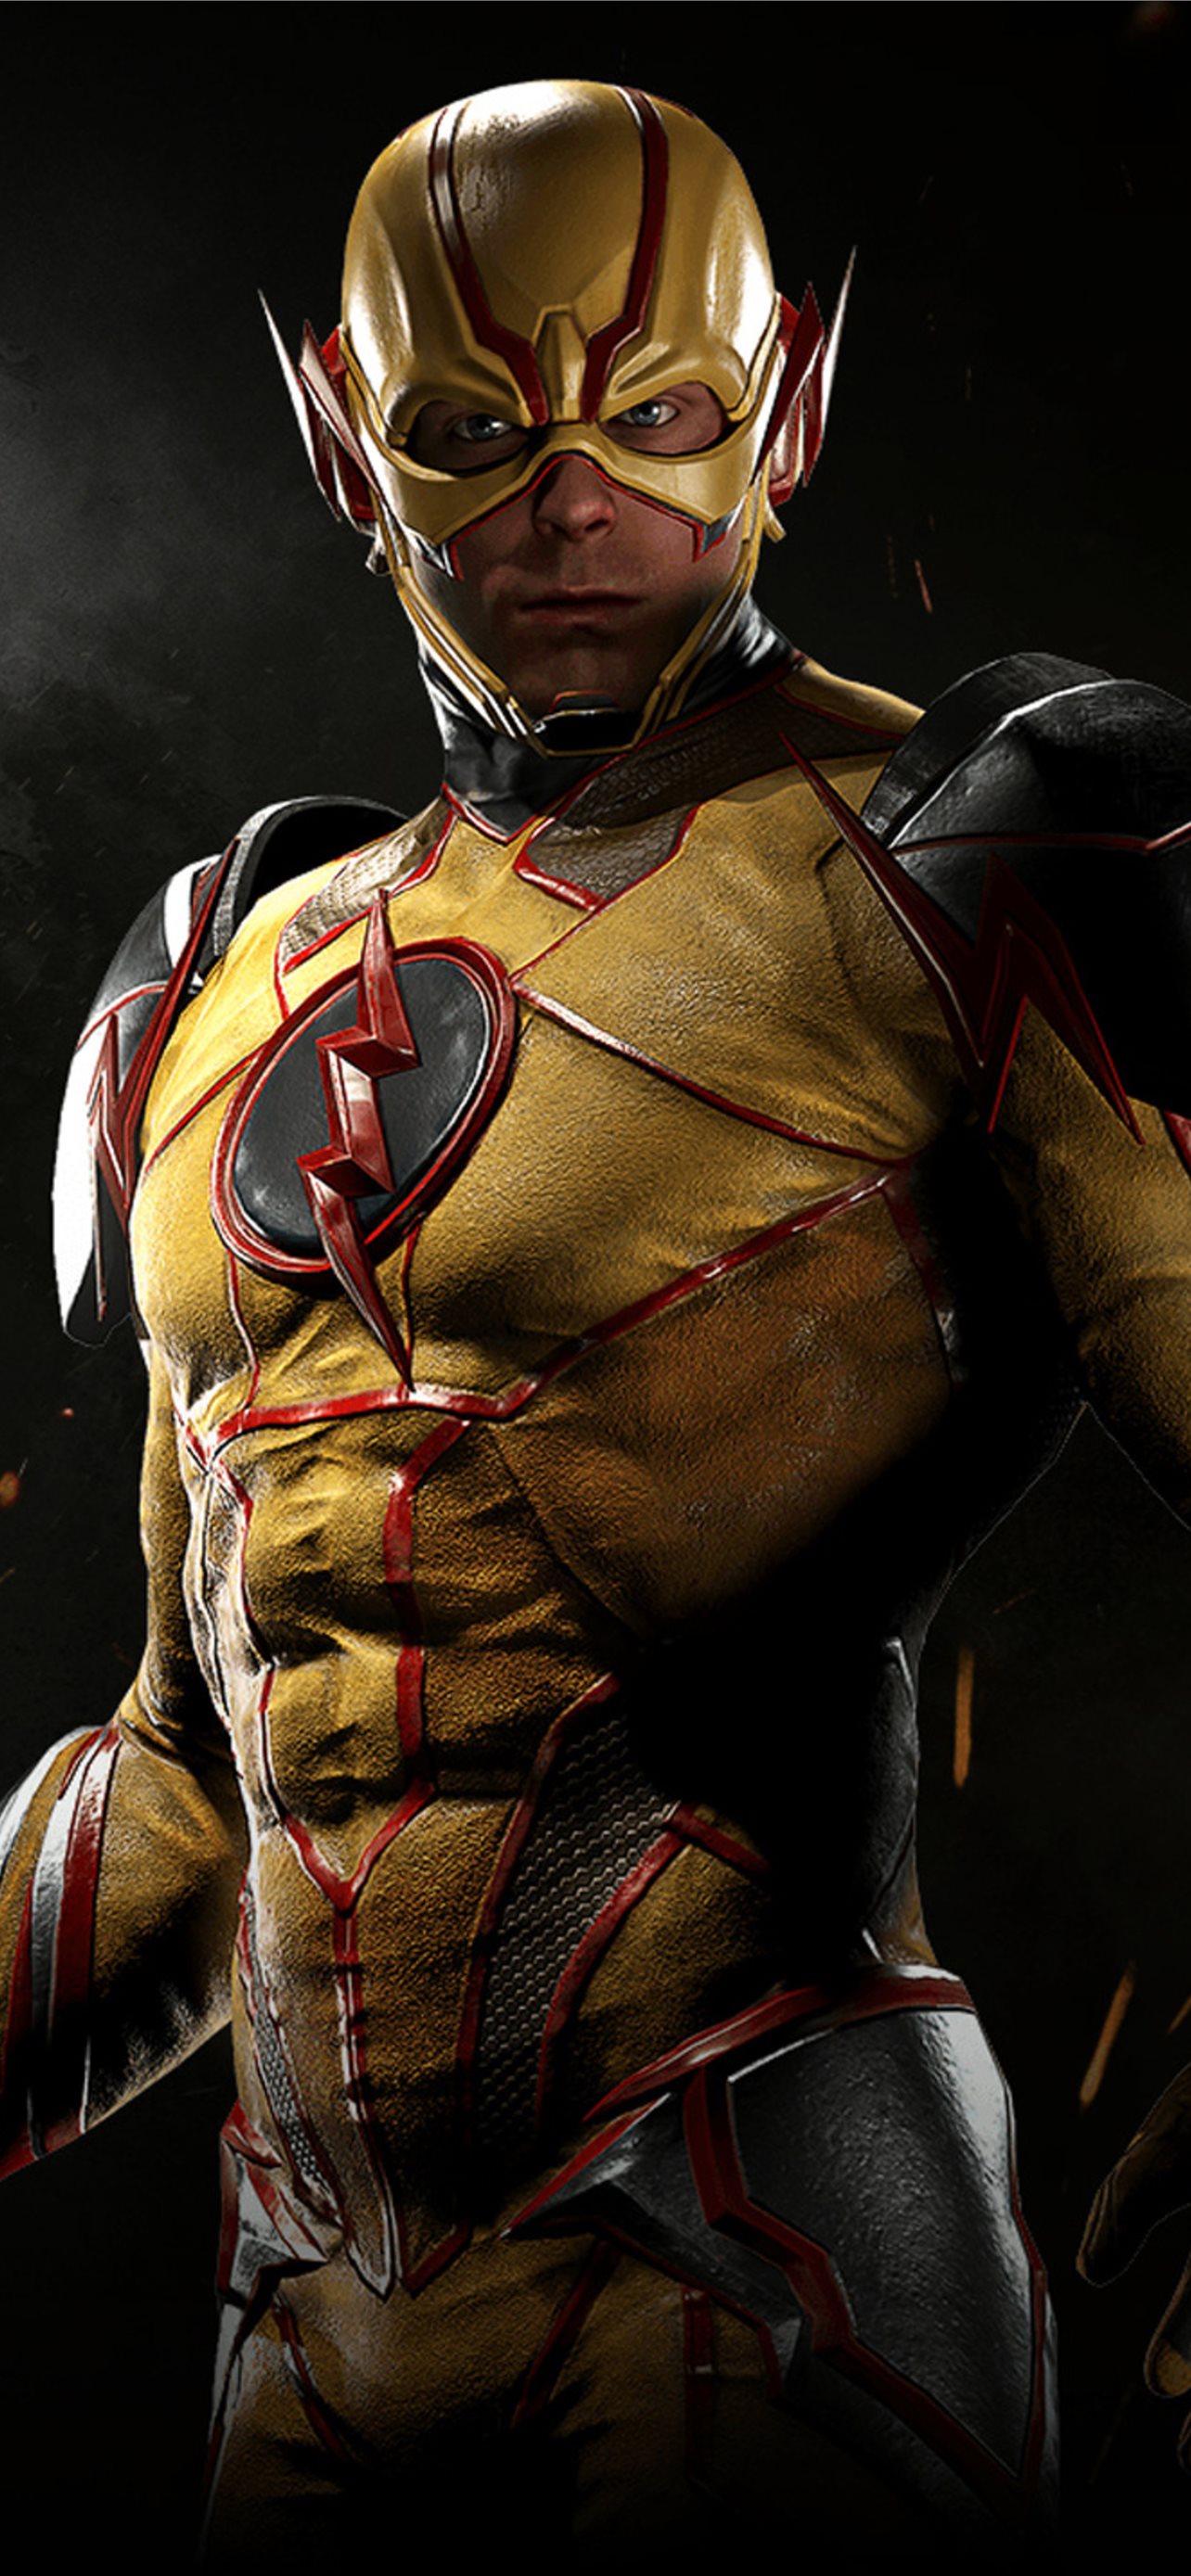 Injustice 2 Reverse Flash Sony Xperia X XZ Z5 Prem... iPhone Wallpapers  Free Download